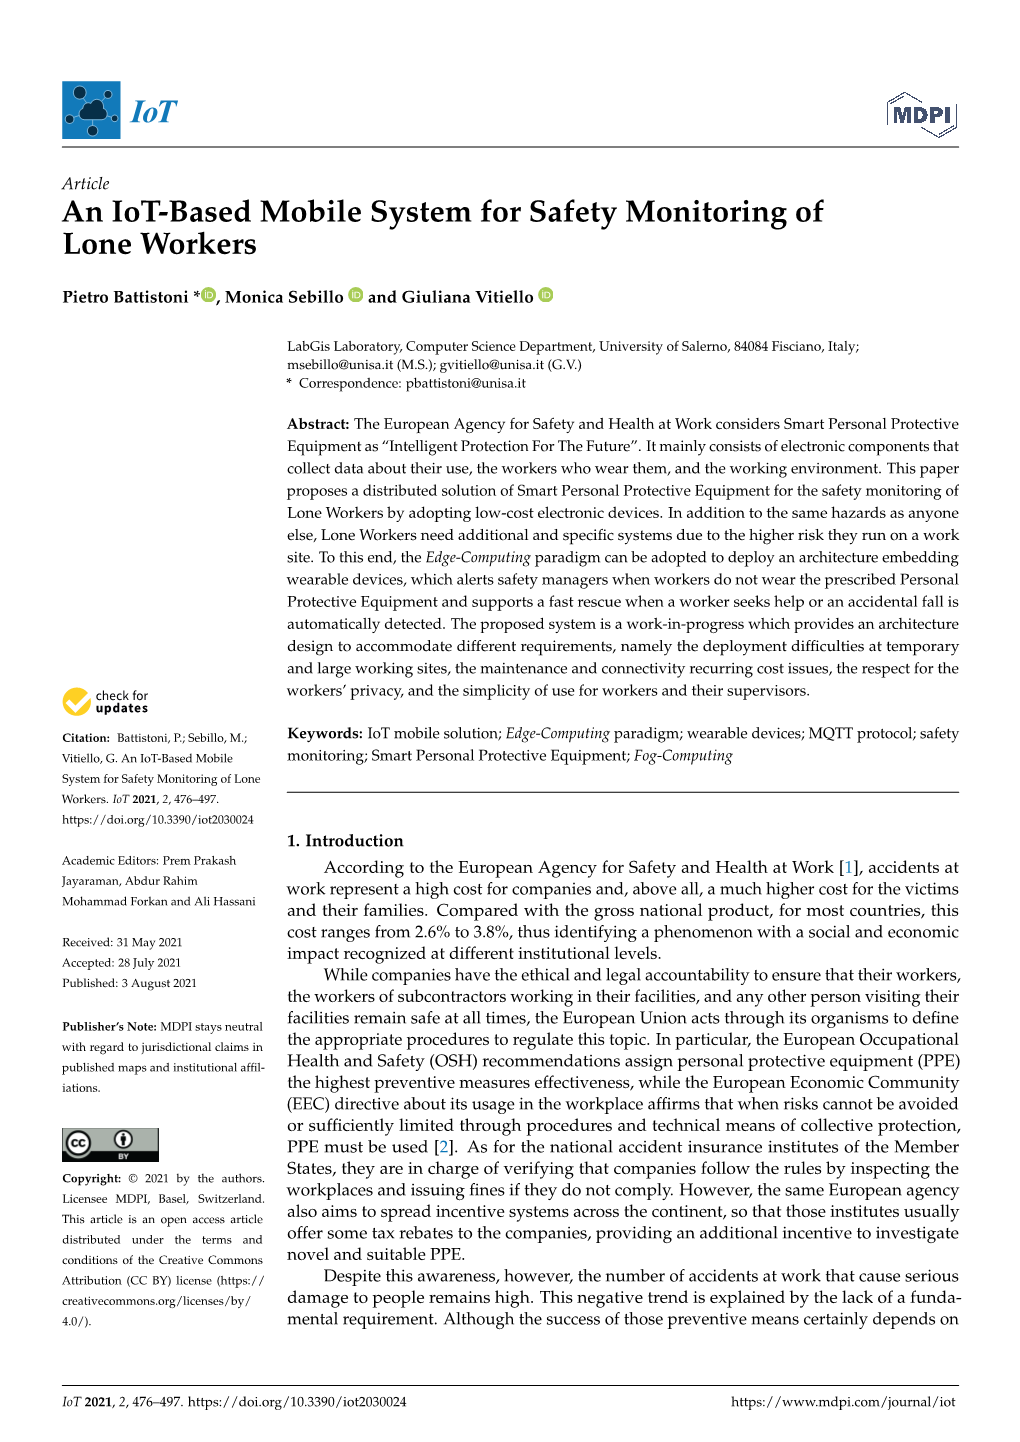 An Iot-Based Mobile System for Safety Monitoring of Lone Workers